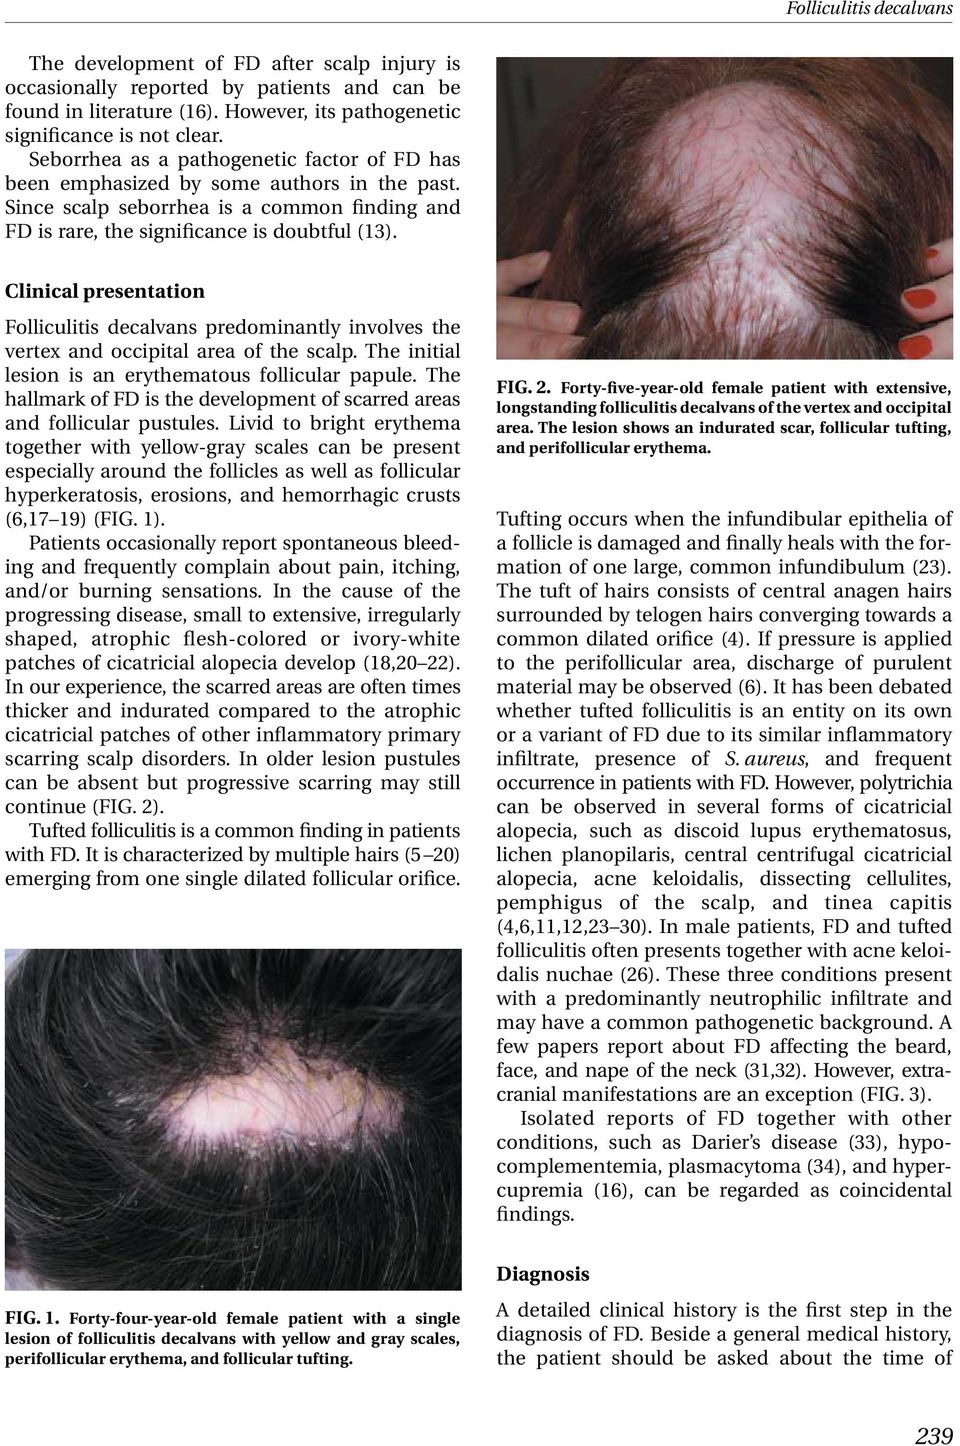 Clinical presentation Folliculitis decalvans predominantly involves the vertex and occipital area of the scalp. The initial lesion is an erythematous follicular papule.